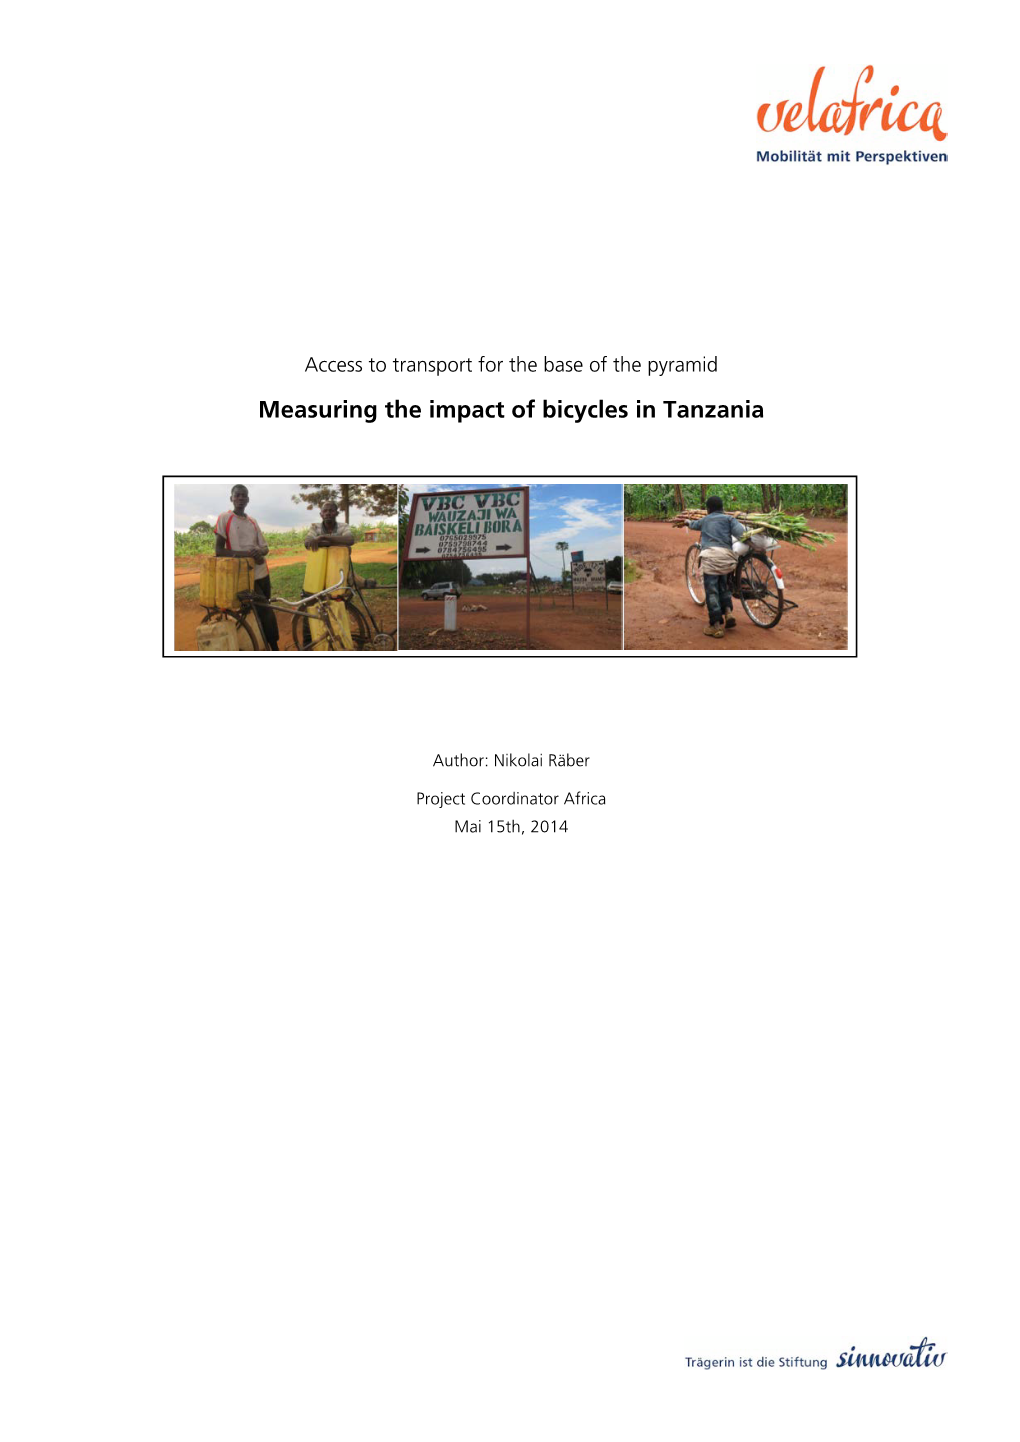 Measuring the Impact of Bicycles in Tanzania